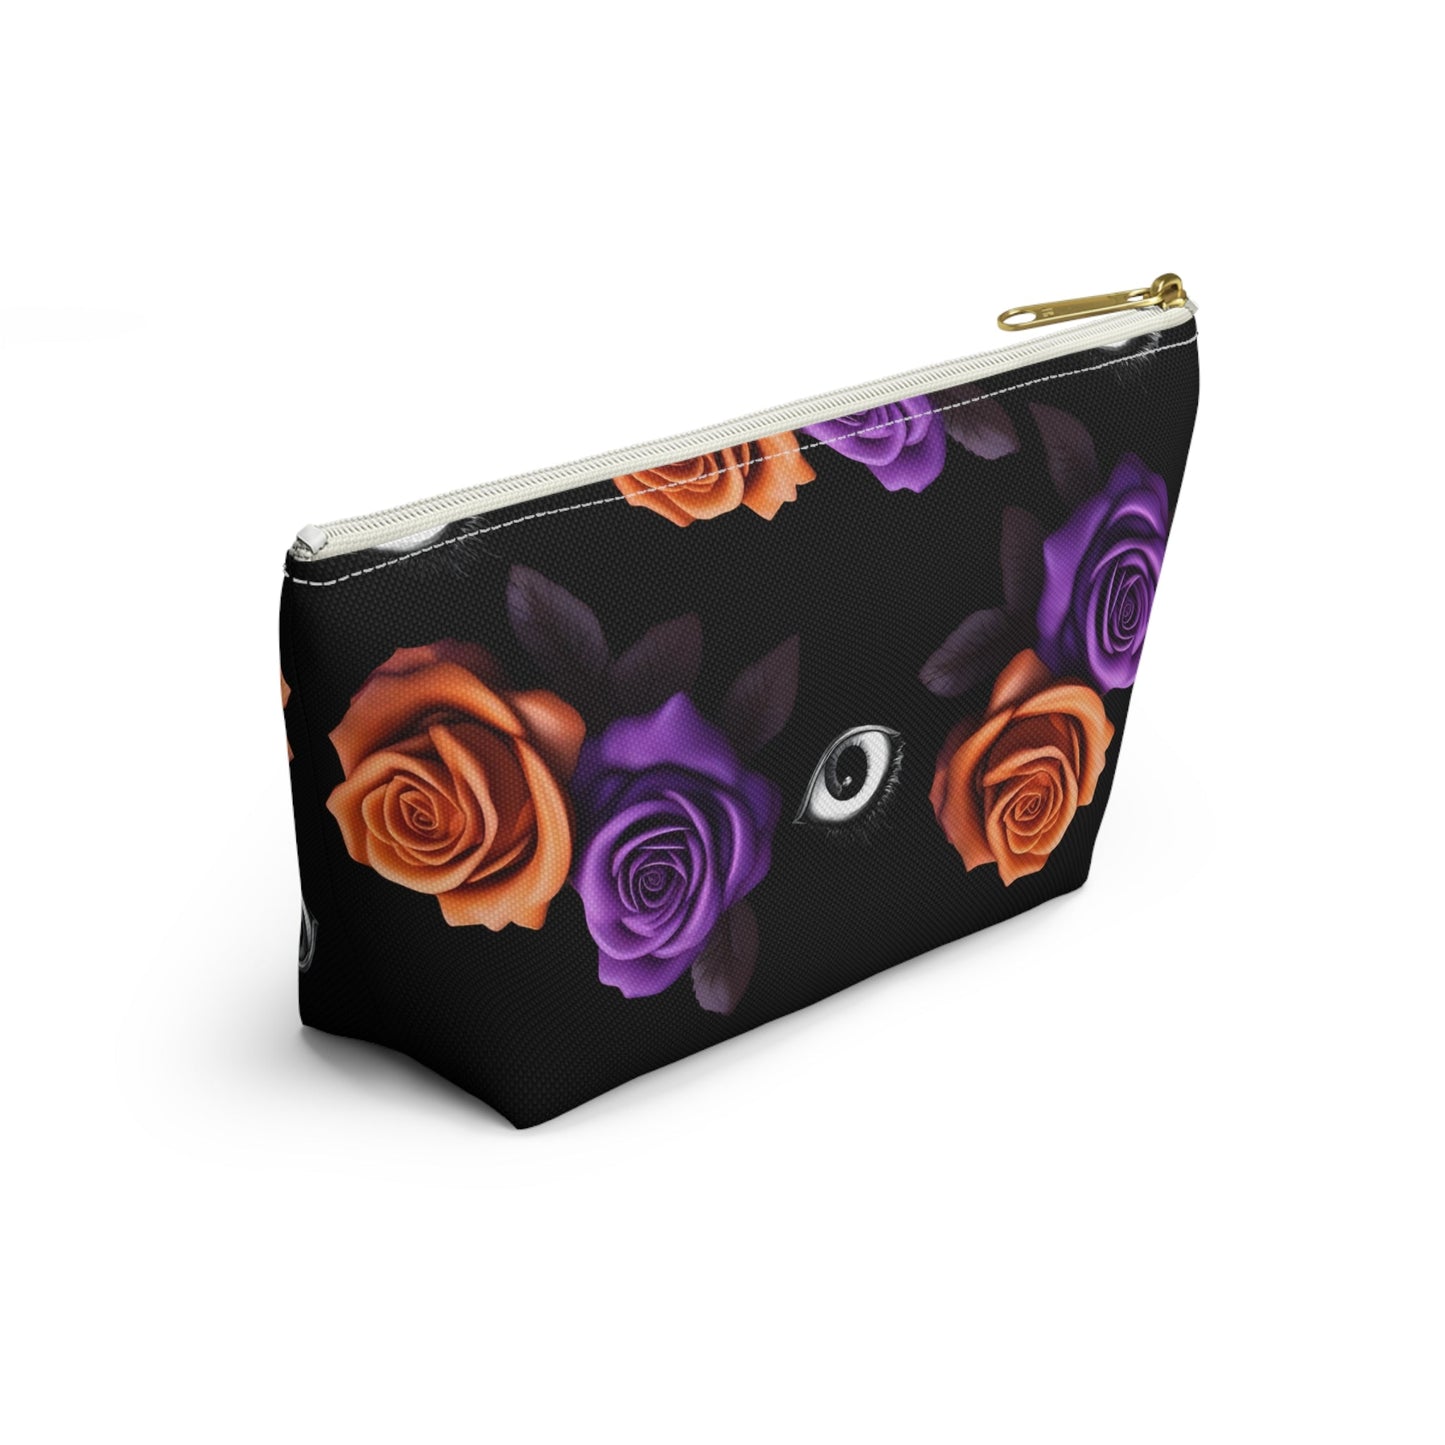 Orange and Purple Roses With Eyeballs Accessory Pouch Cosmetic BagBagsVTZdesignsLargeBlack zipperAccessoriesAll Over PrintAssembled in the USA